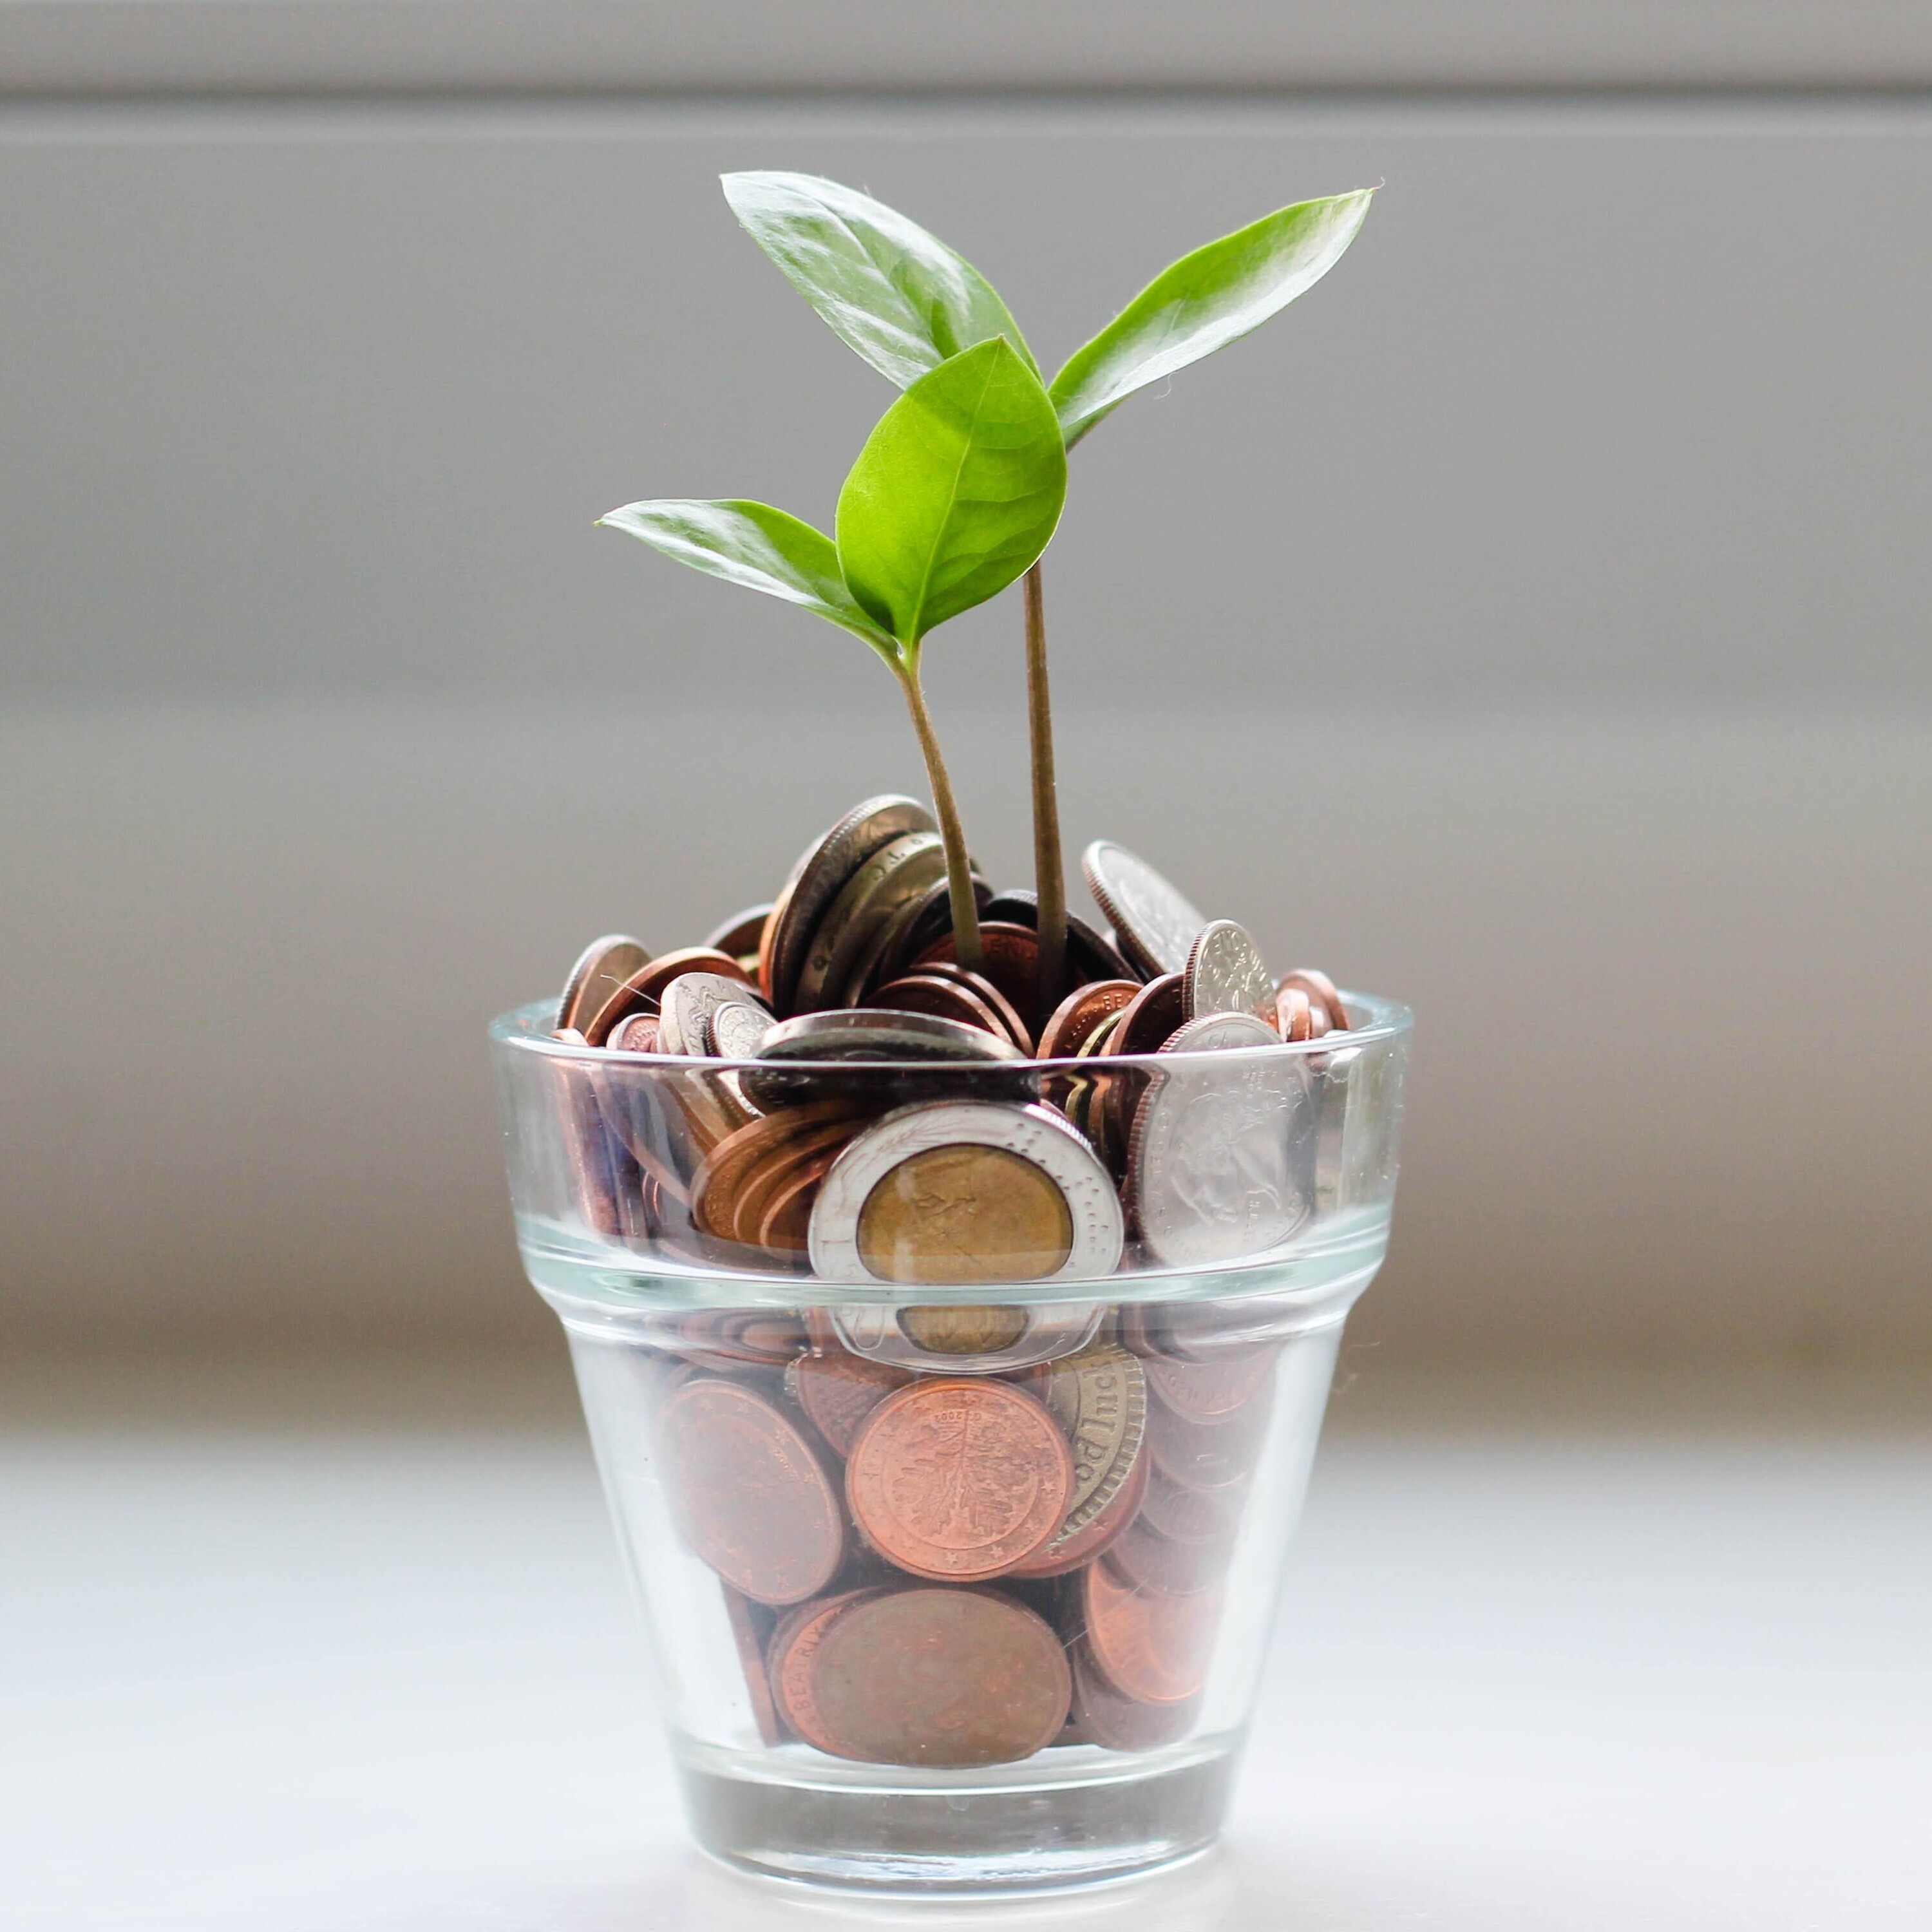 A glass container of coins with a leaf popping out the center